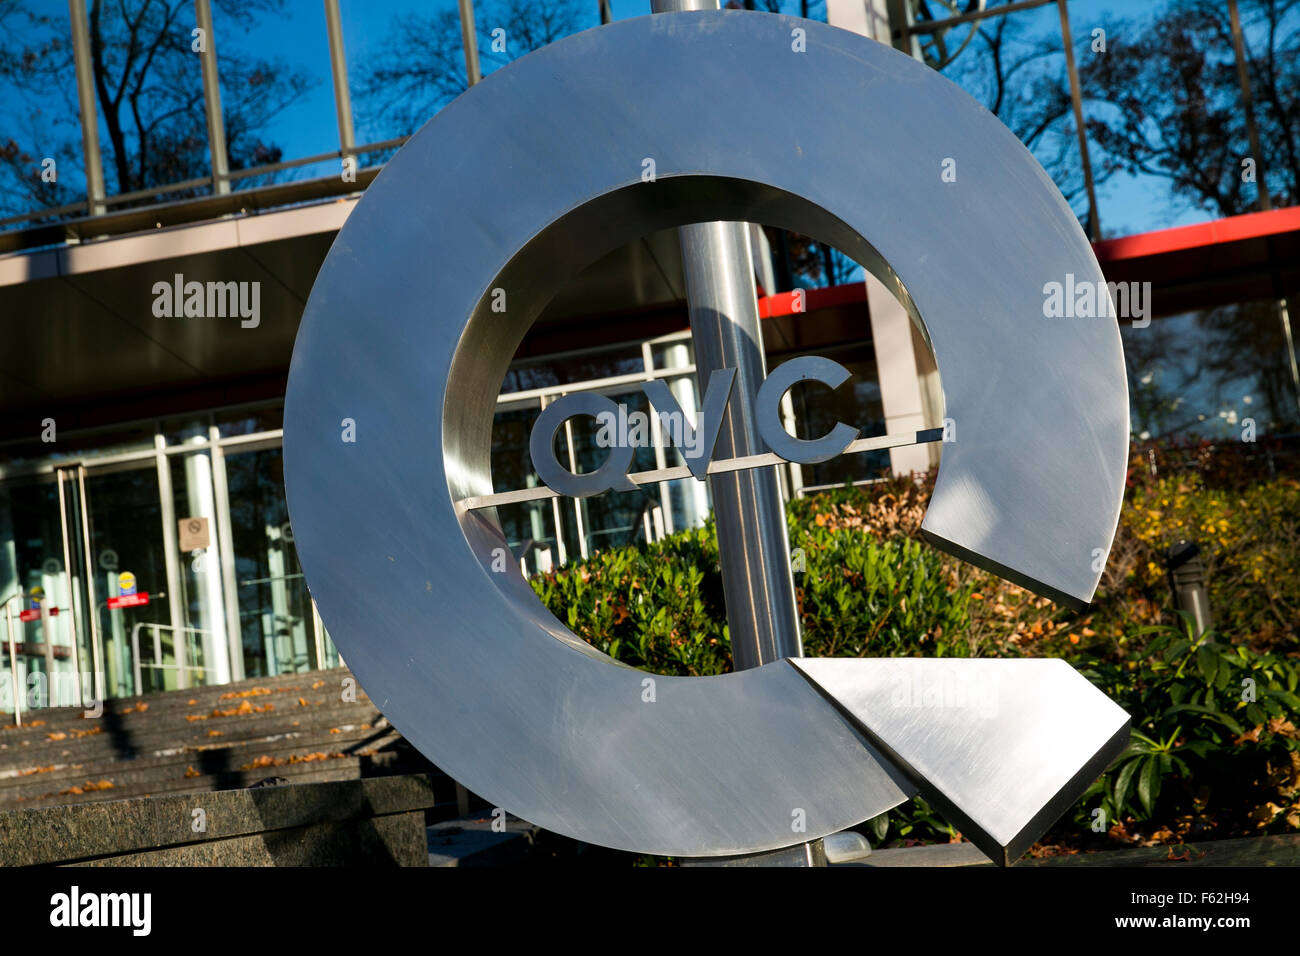 A logo sign outside of the headquarters of the television shopping channel, QVC, in West Chester, Pennsylvania on November 8, 20 Stock Photo